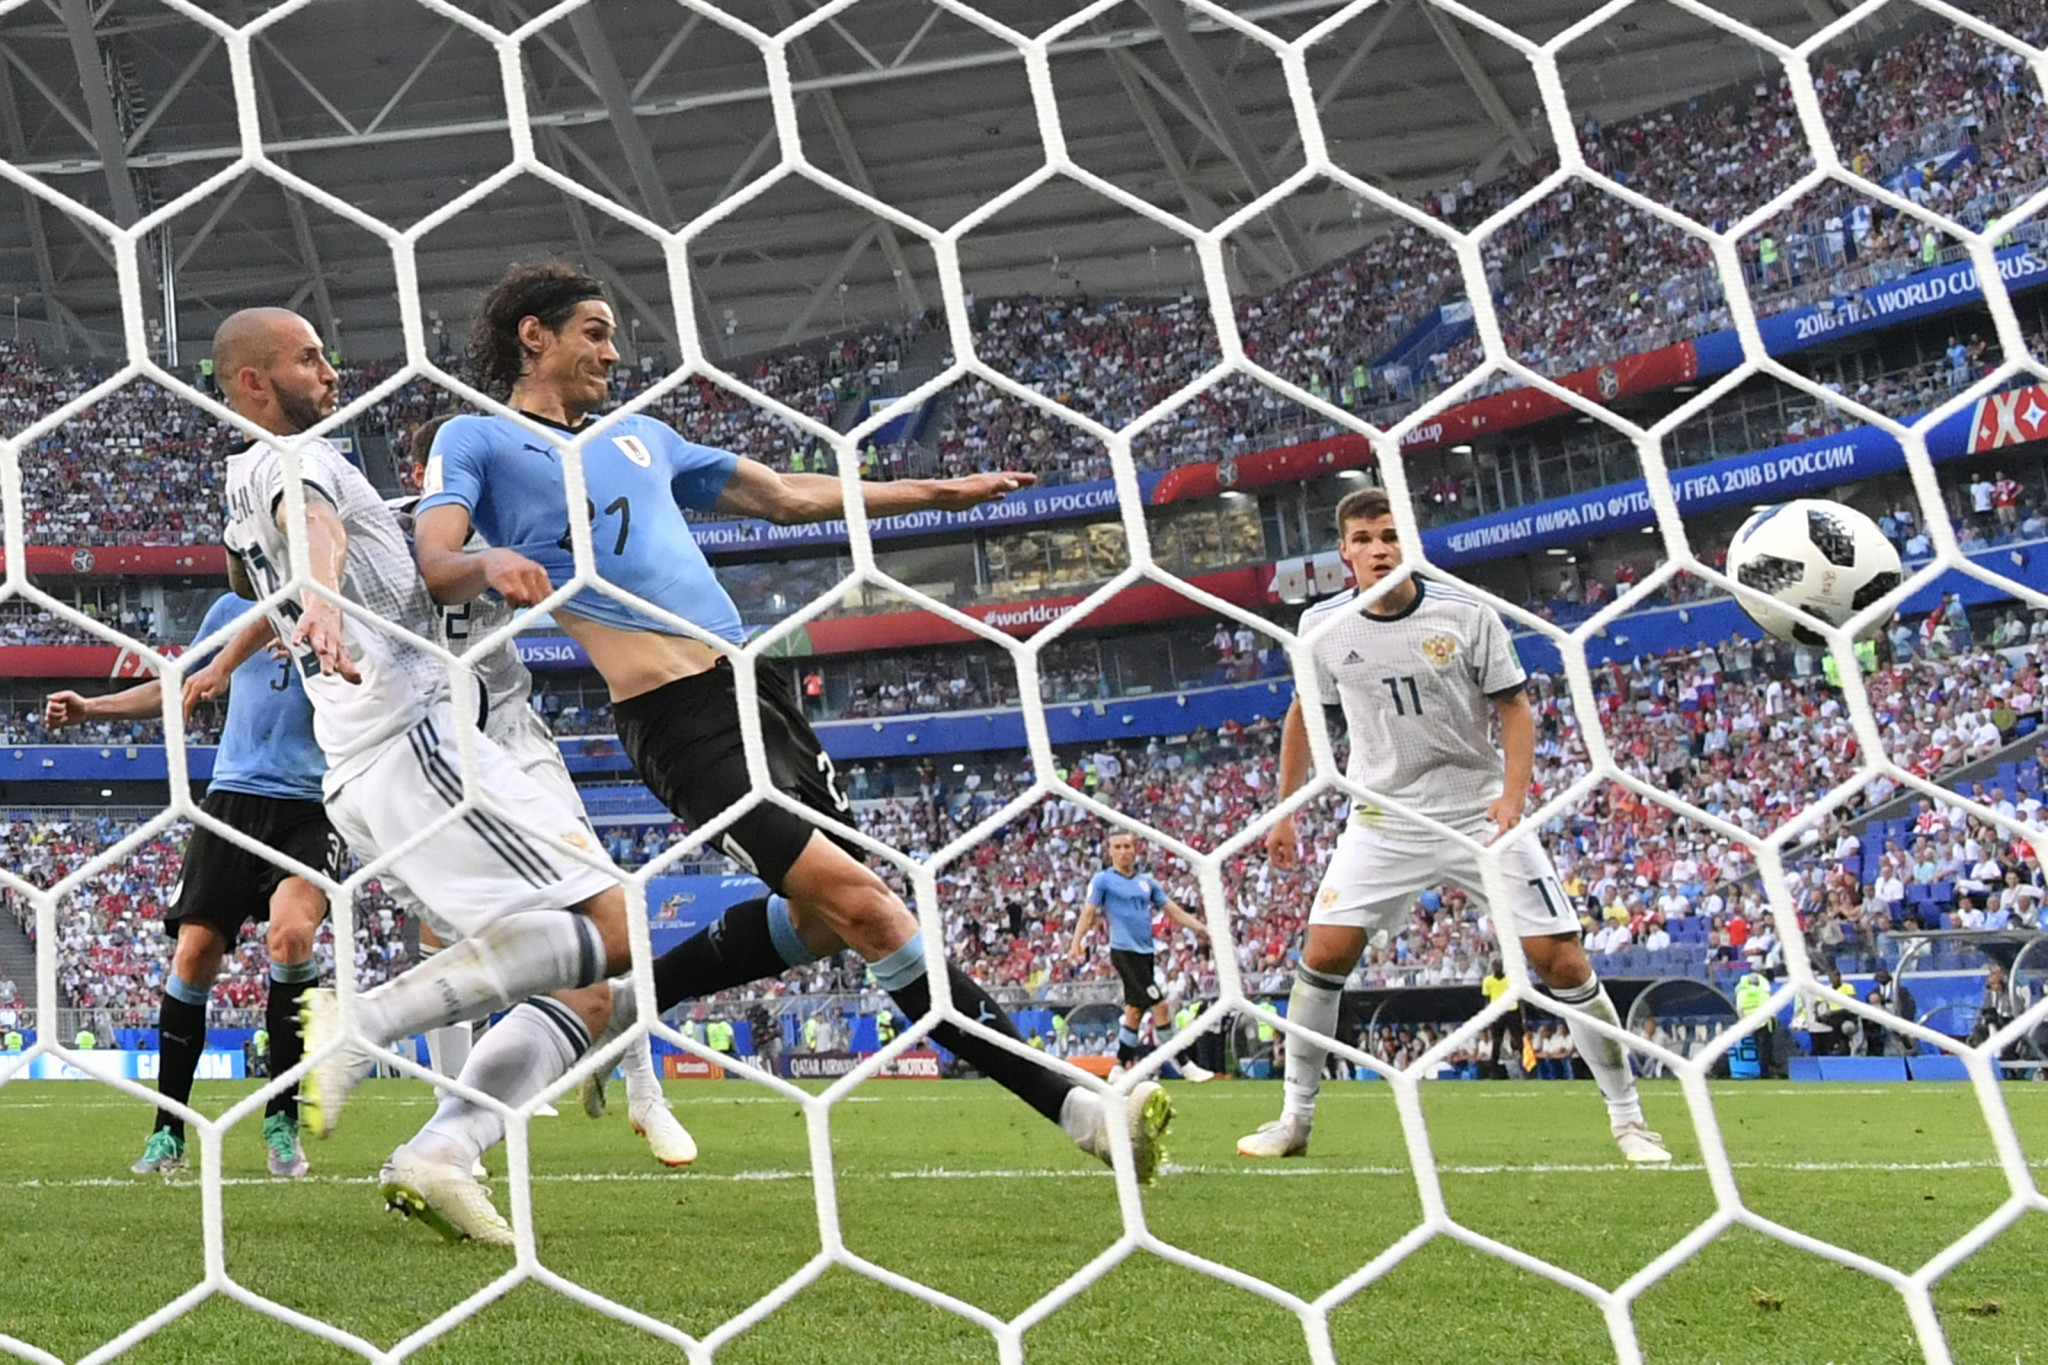 Edinson Cavani was among the scorers as Uruguay finished top of Group A with victory over Russia